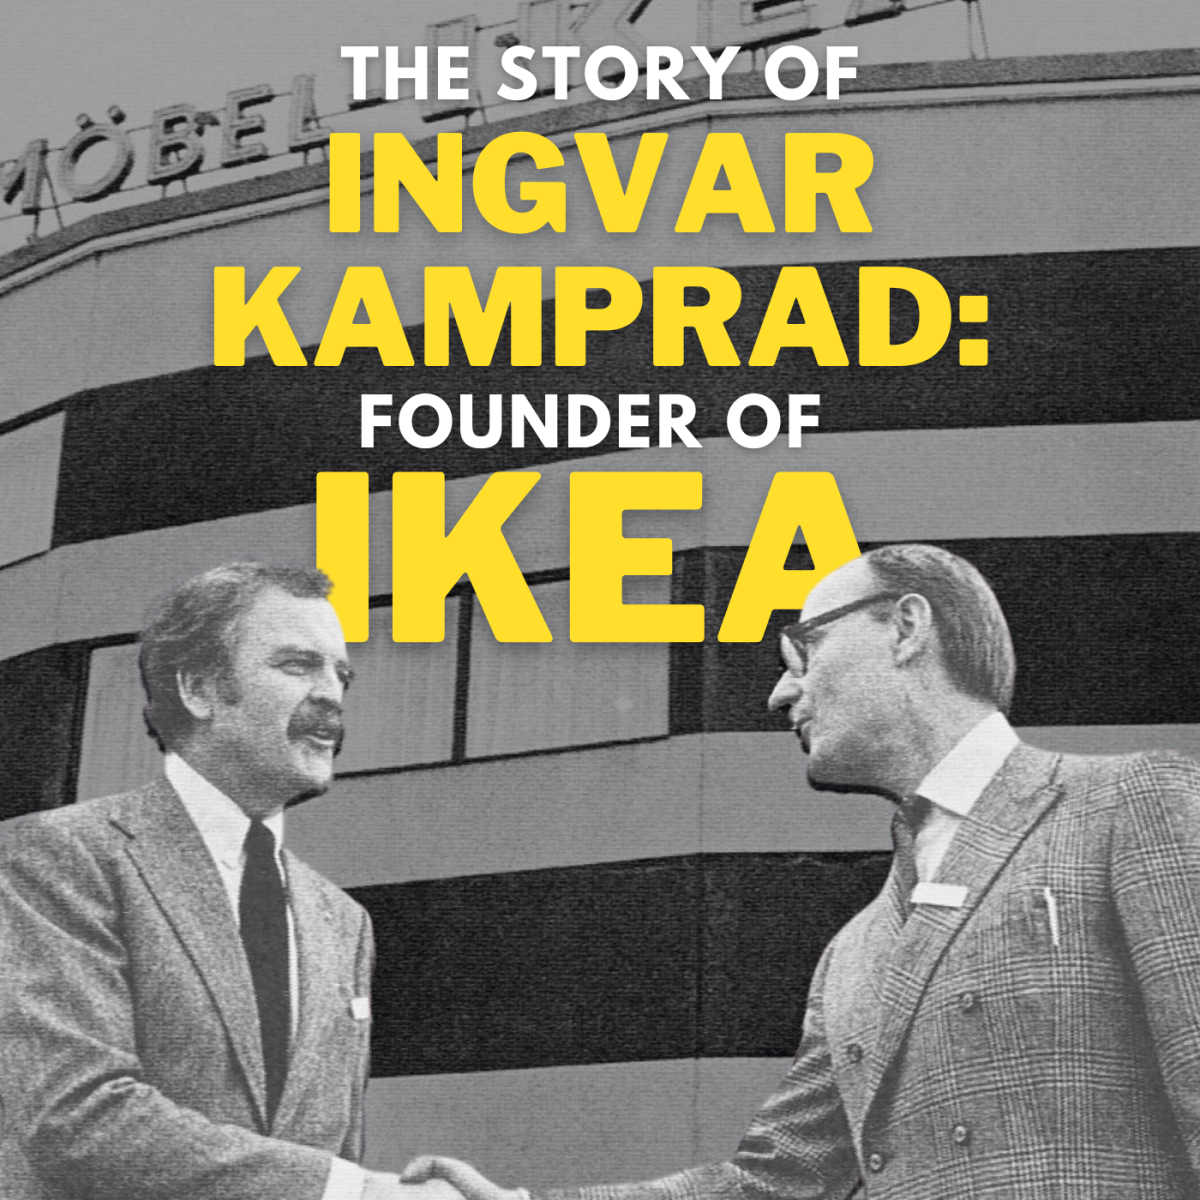 Challenges Faced by Ingvar Kamprad, IKEA's Founder